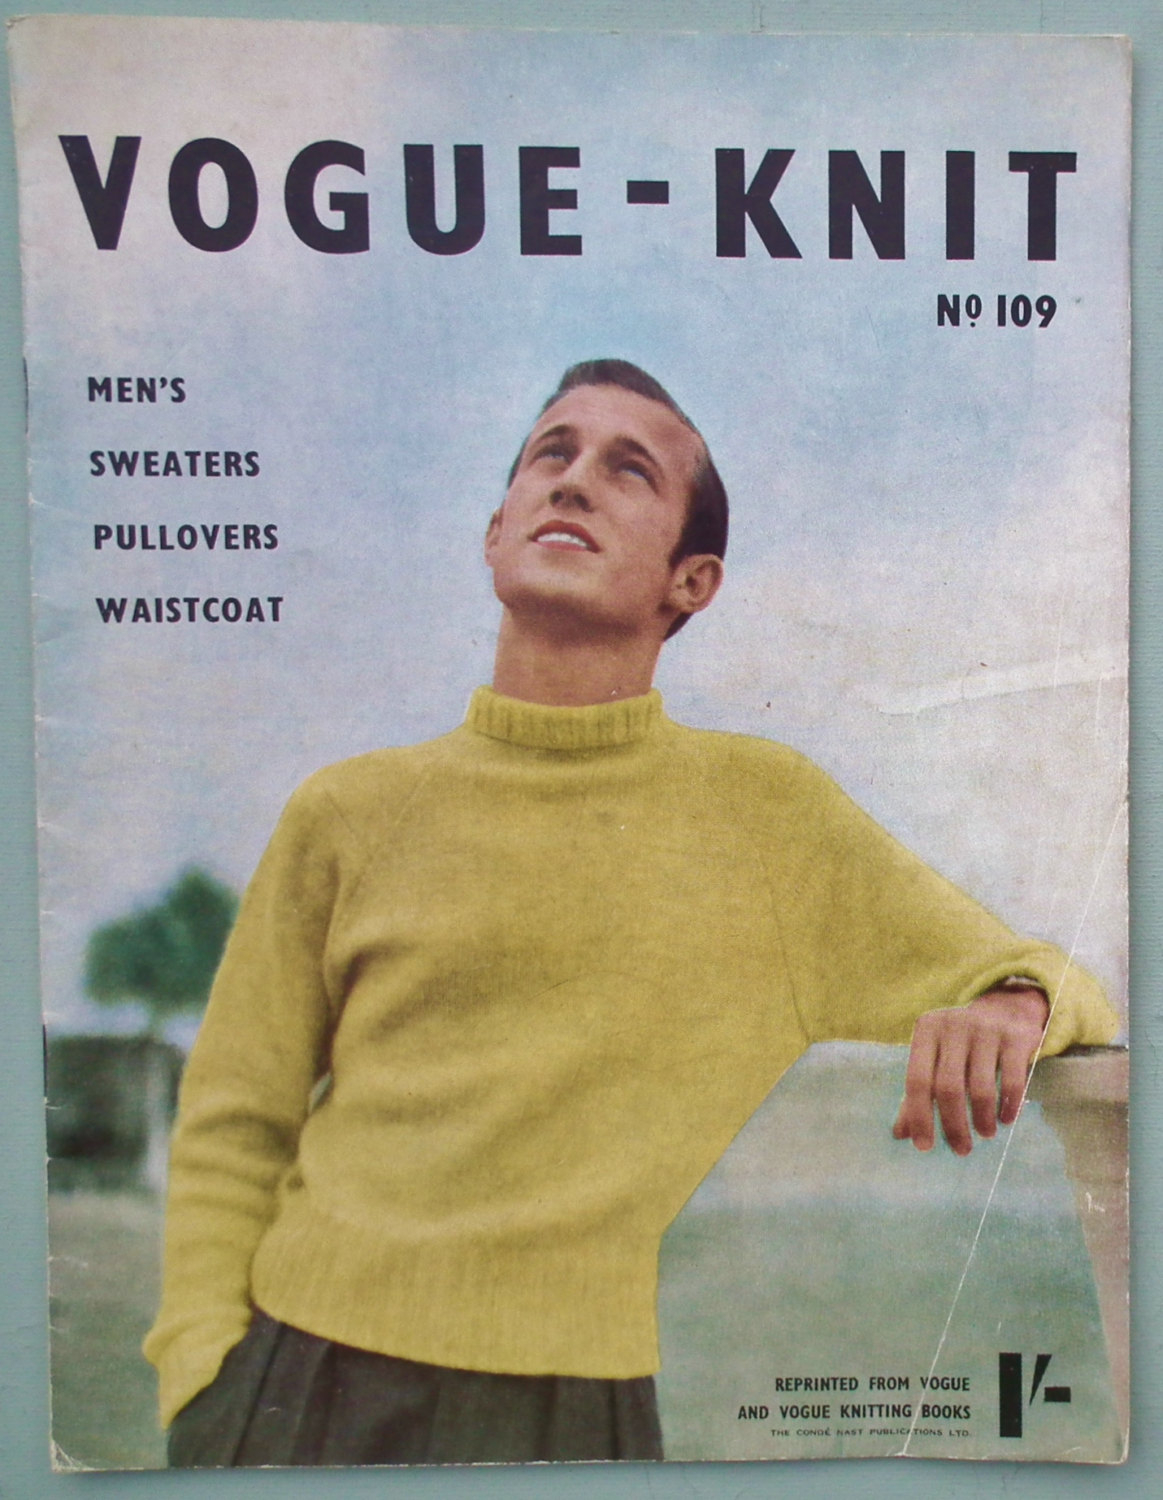 Knitting Patterns Vogue Vogue Knit No 109 Mens Sweaters Pullovers Waistcoat 1953 Knitting Patterns Book Vintage 1940s 1950s 40s 50s Original Patterns